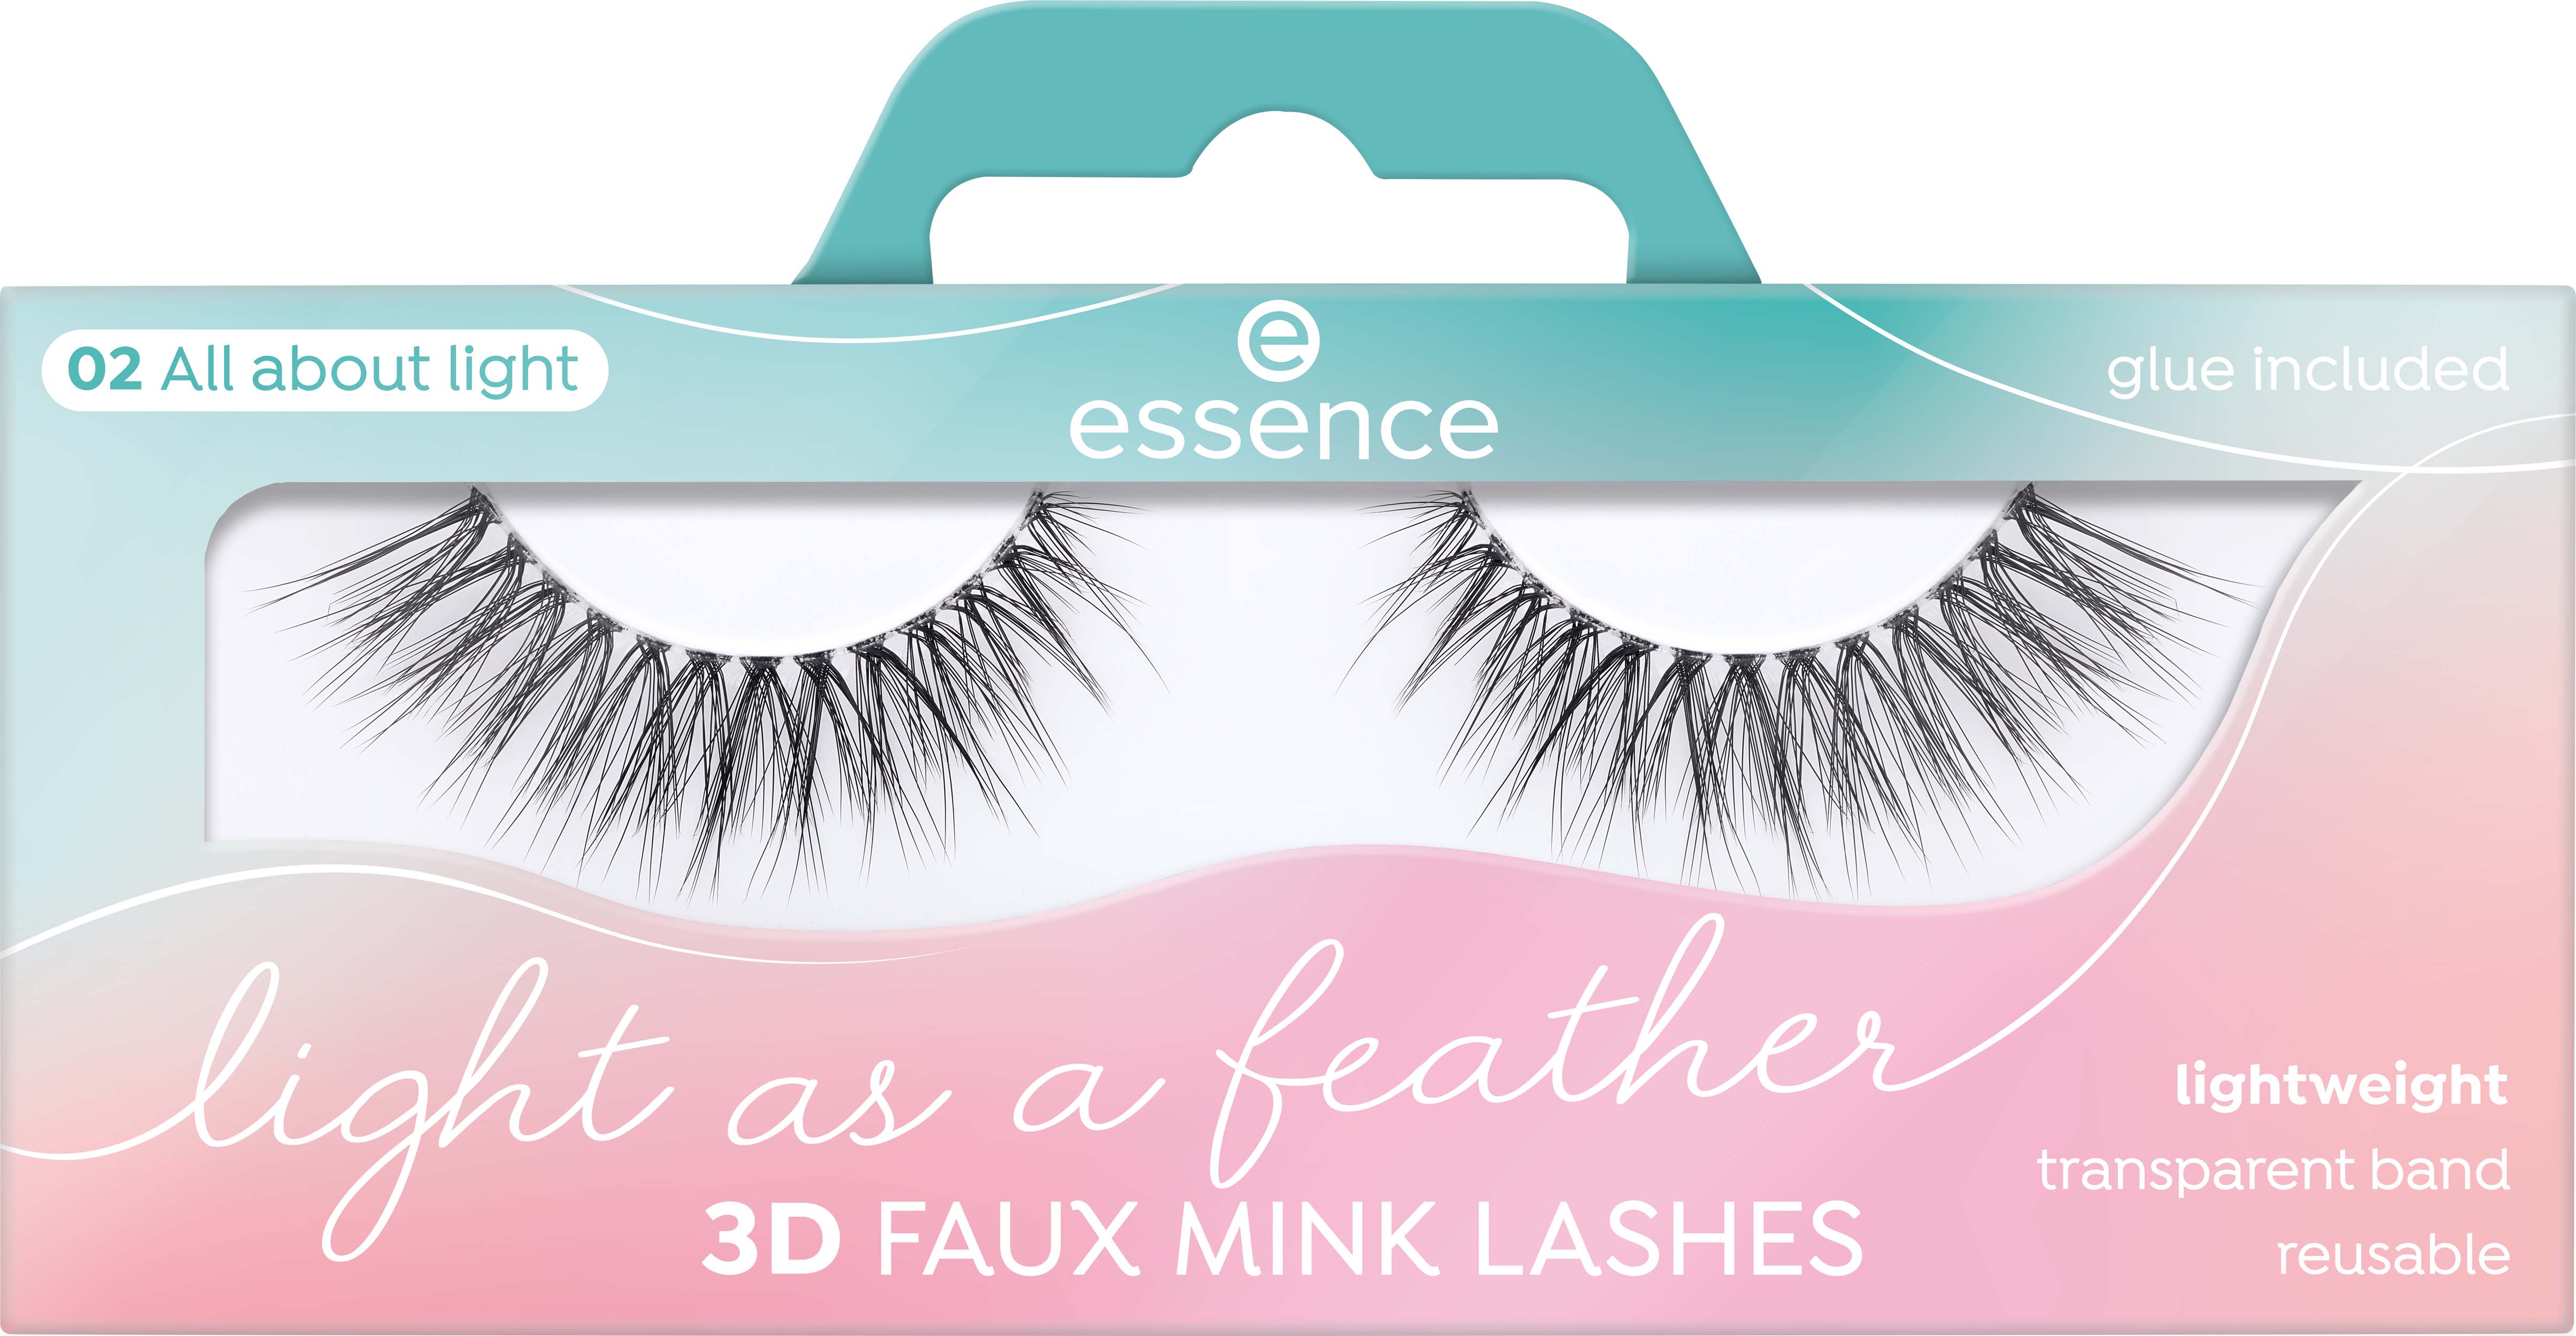 02 about All A Lashes Faux essence 3D Light light Feather Mink As